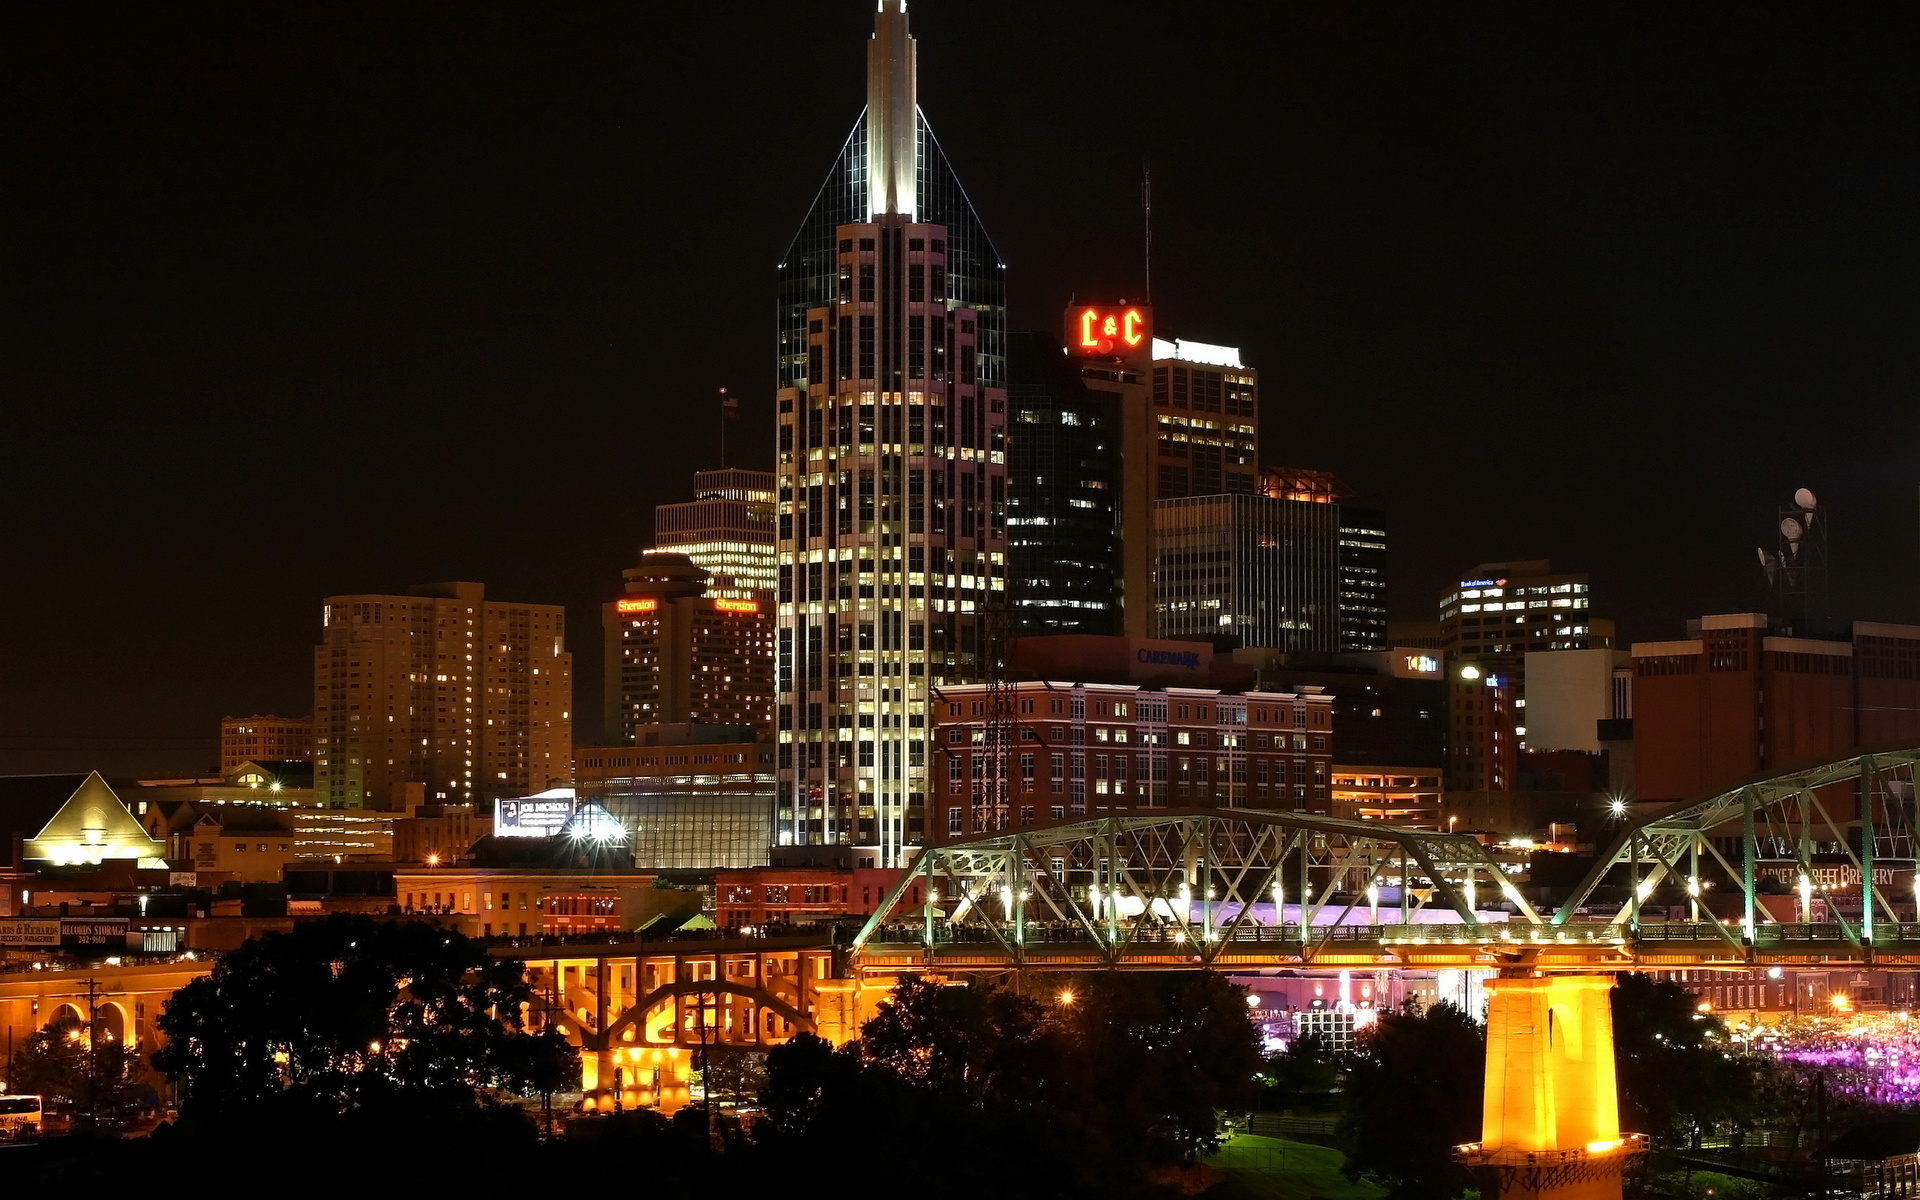 usa, Nashville, Tenessee, Cities, Architecture, Buildings, Skyscrapers, Bridges, Night, Lights, Hdr Wallpaper